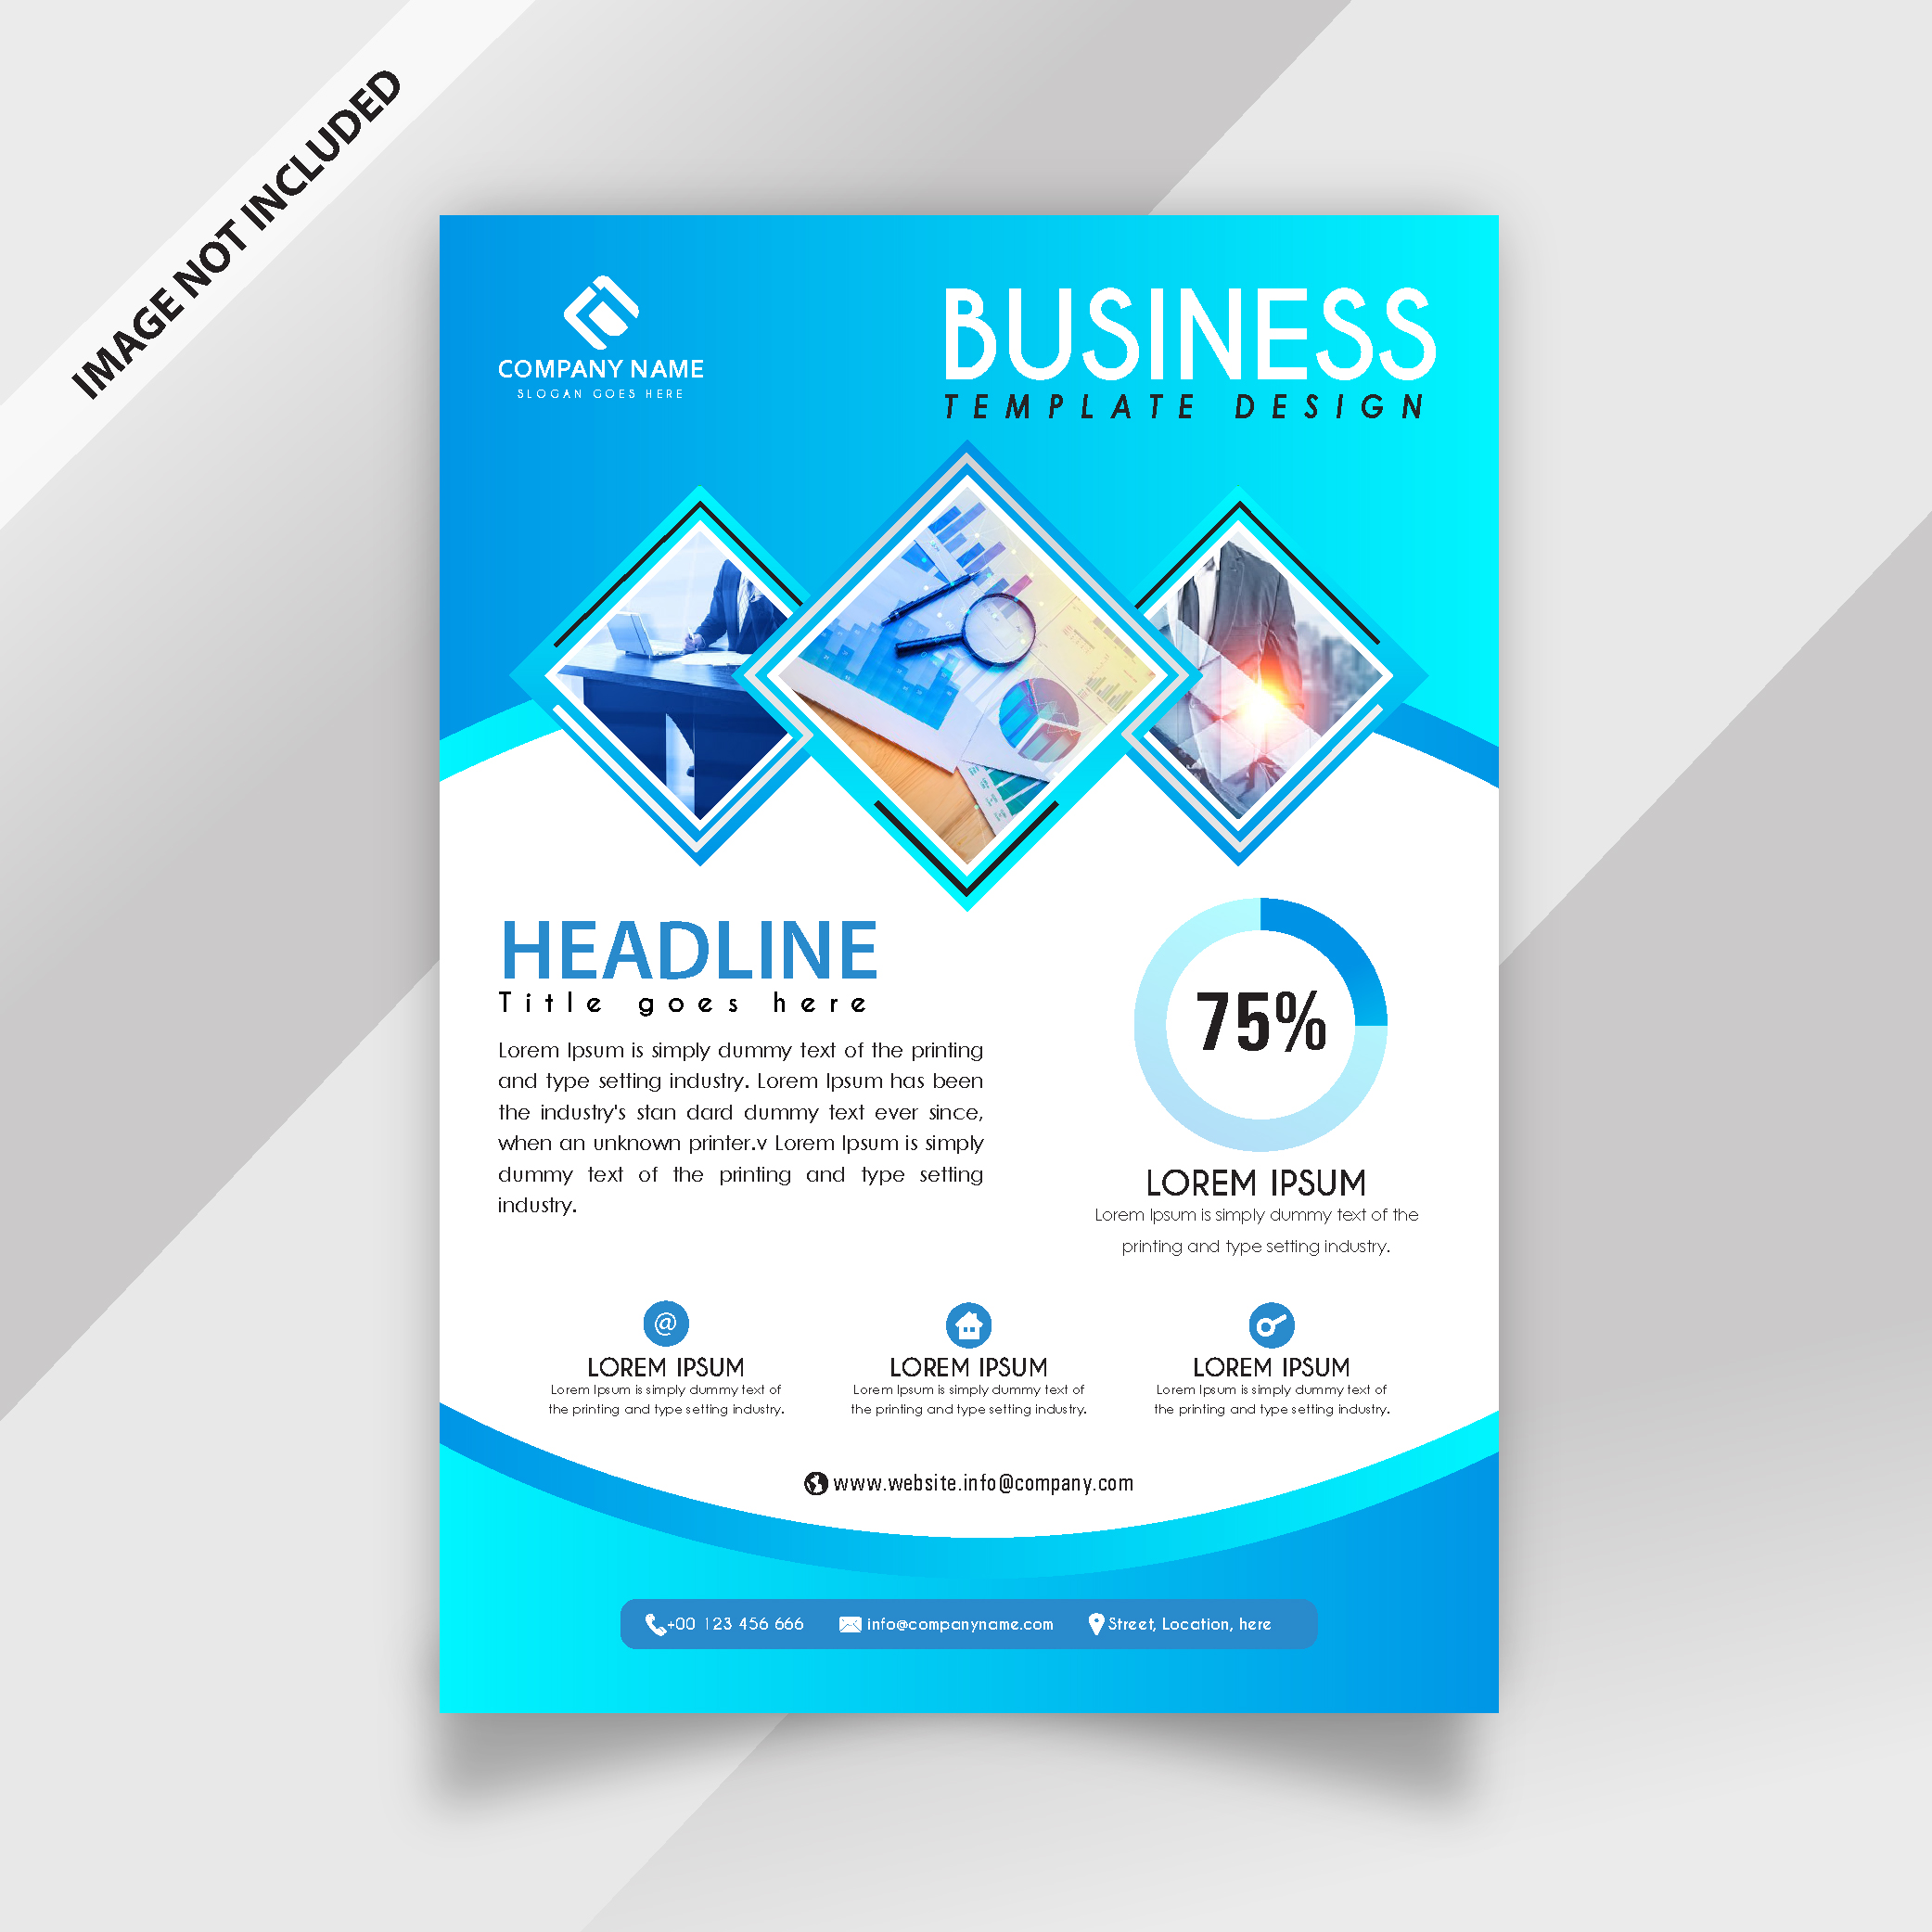 modern-professional-business-flyer-template-vector-free-download